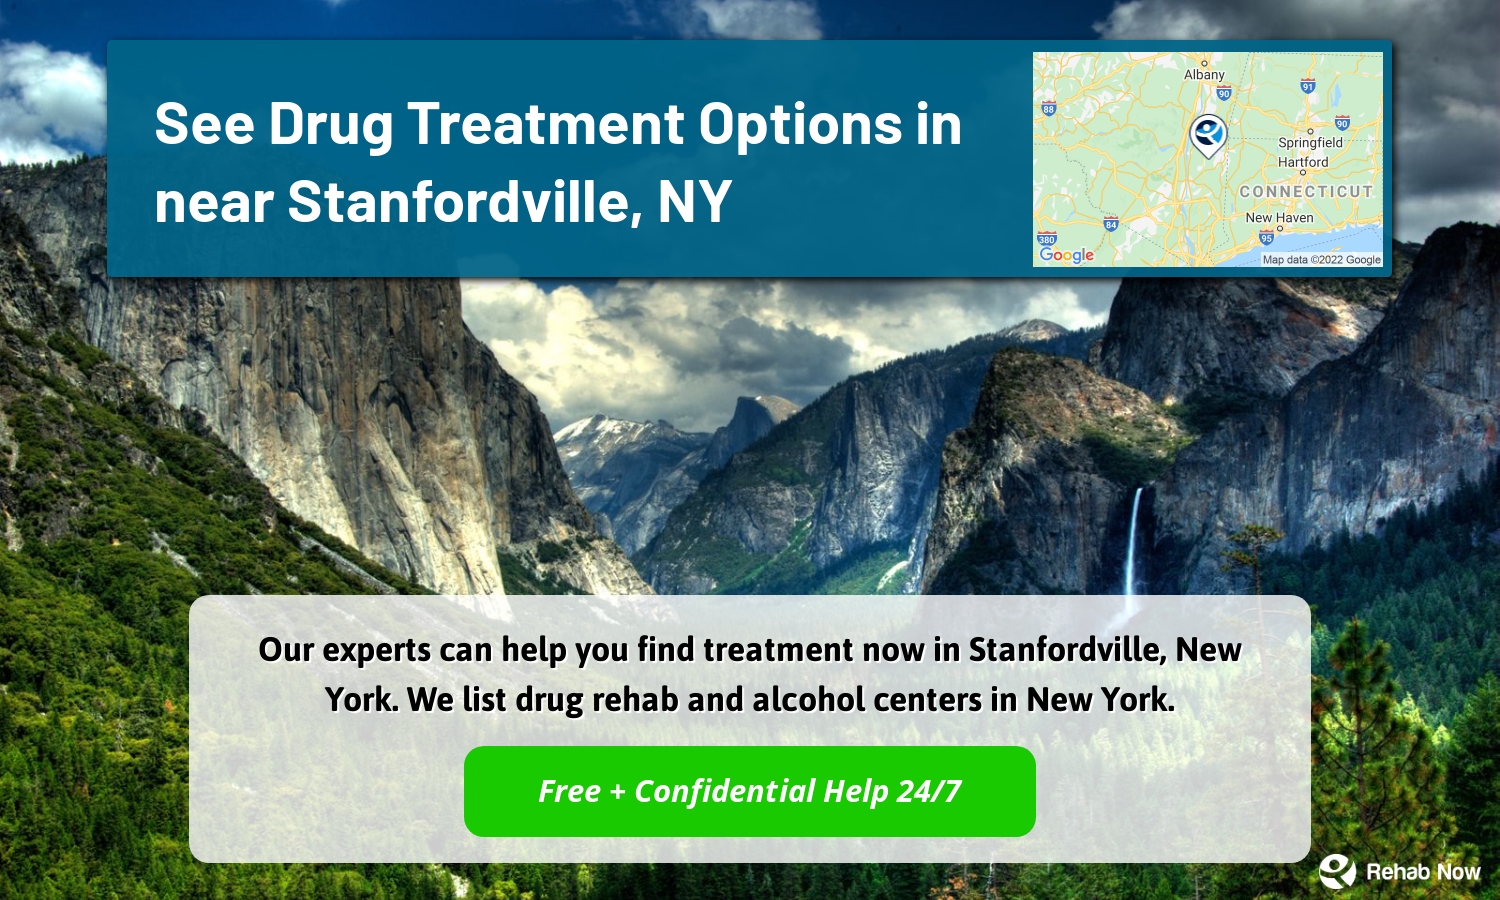 Our experts can help you find treatment now in Stanfordville, New York. We list drug rehab and alcohol centers in New York.